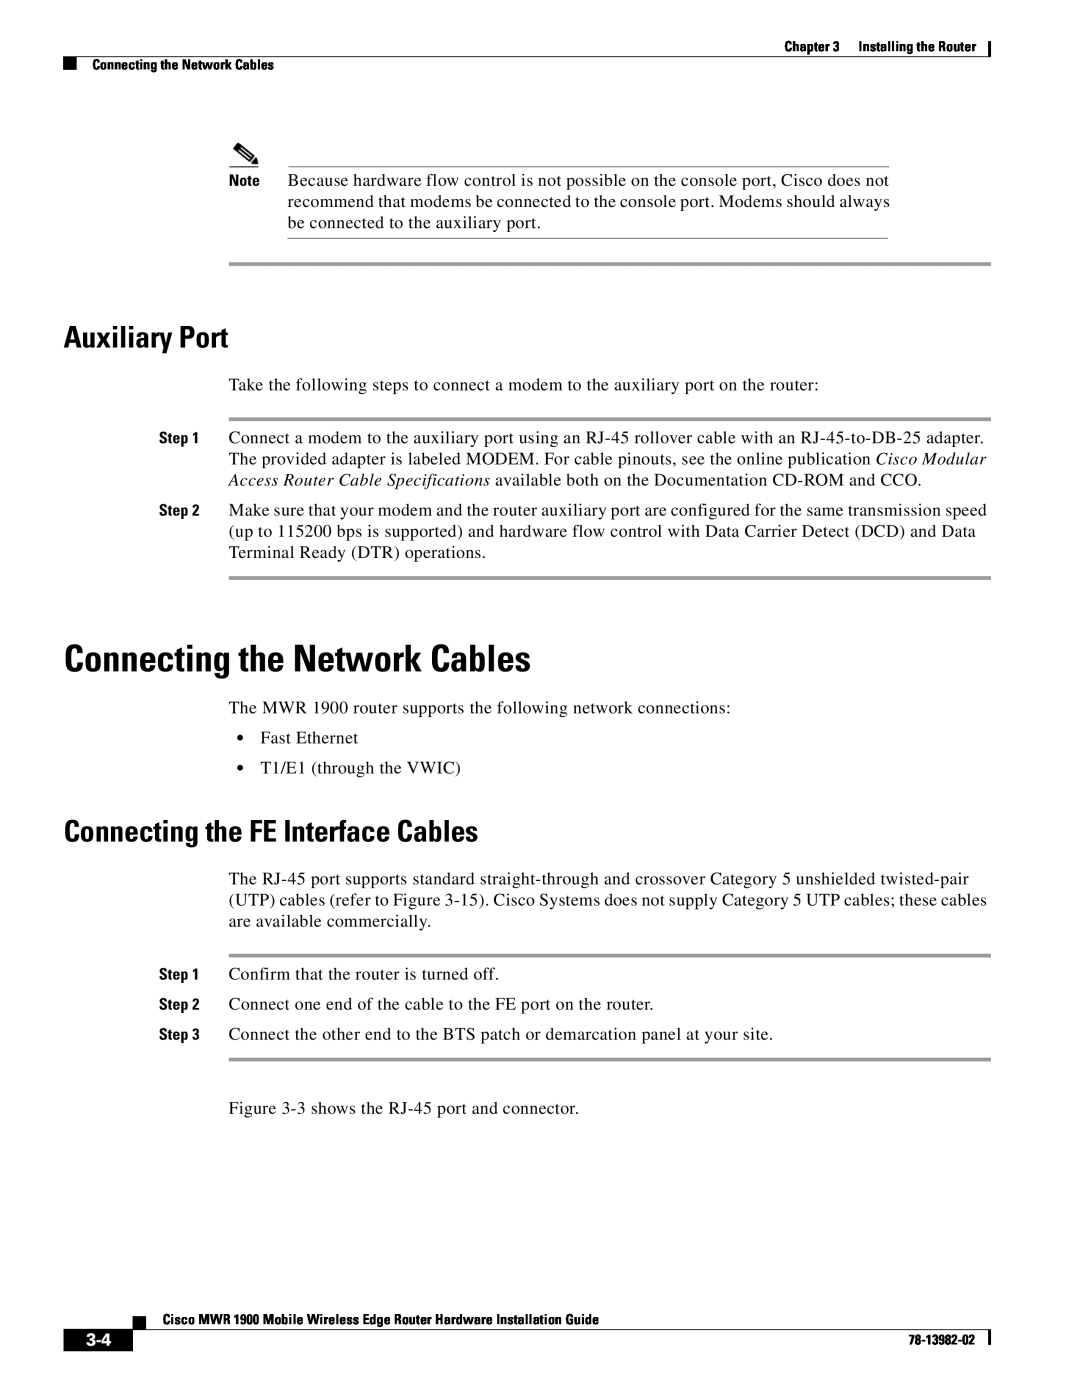 Cisco Systems MWR 1900 manual Connecting the Network Cables, Auxiliary Port, Connecting the FE Interface Cables 